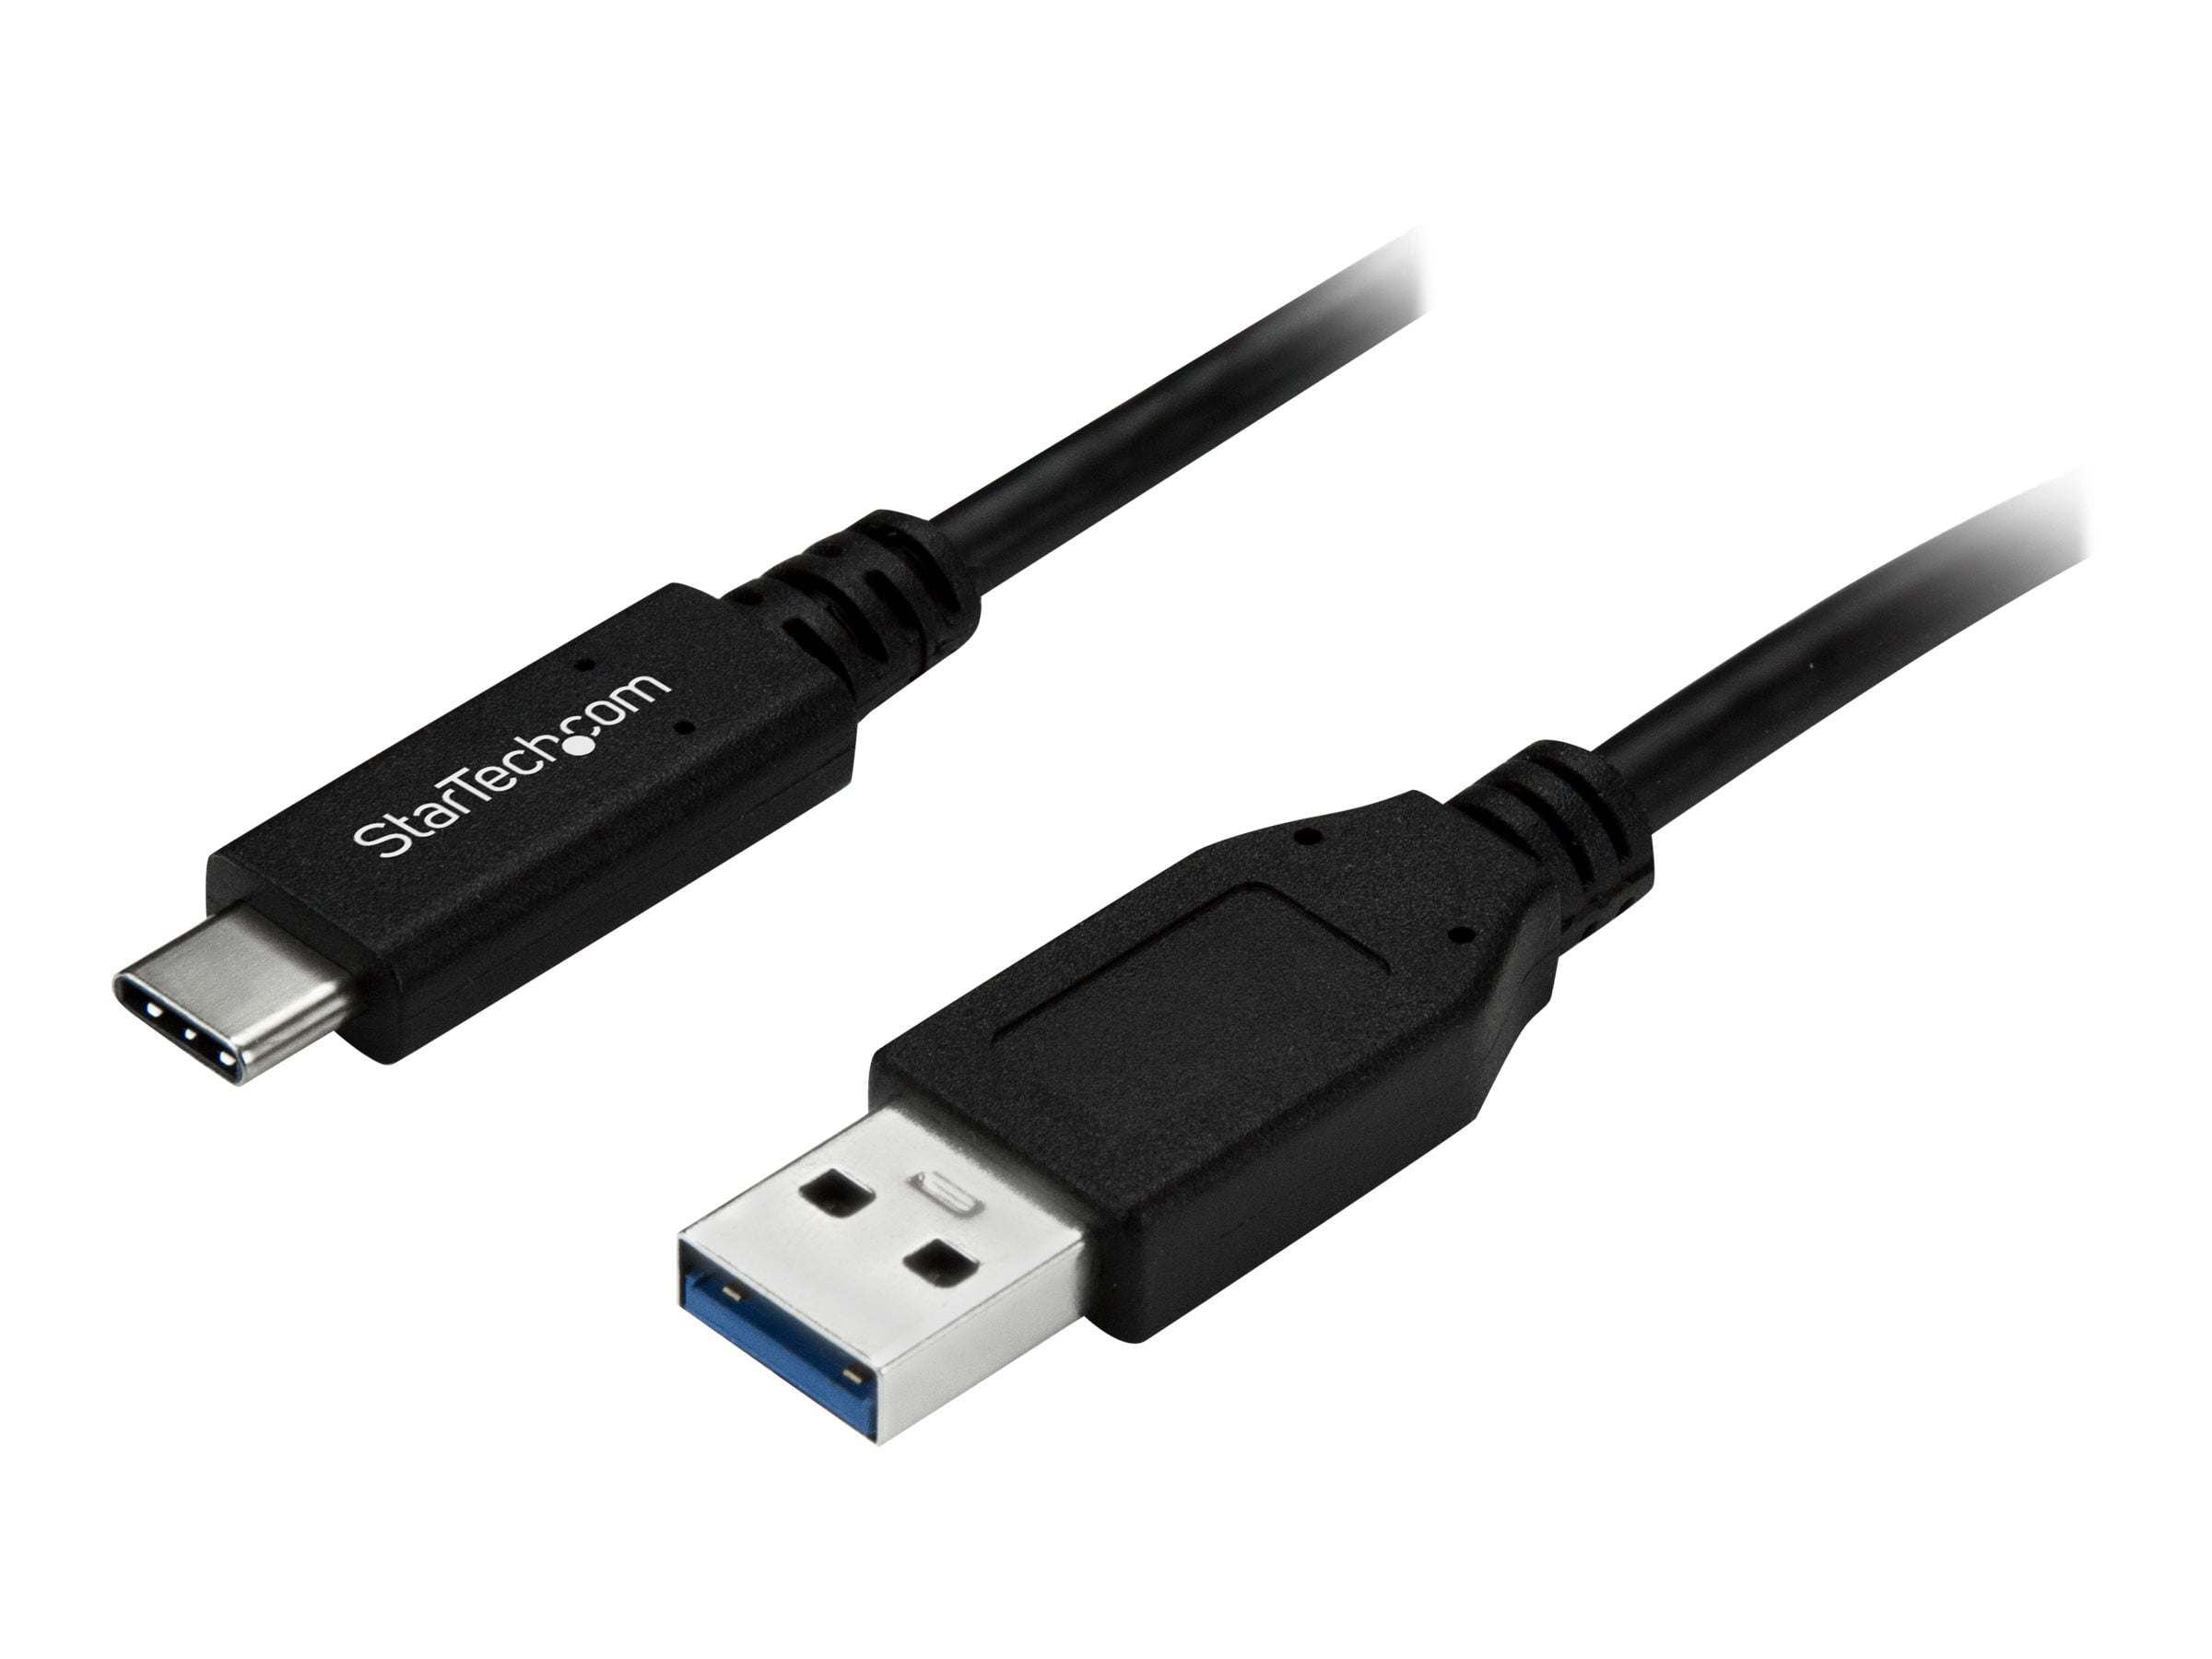 Excerpt Composer Bleed USB Cable Male to Male - USB C to USB - USB for Hard Drive, Tablet,  Notebook - 640 MB/s - 3.28 ft